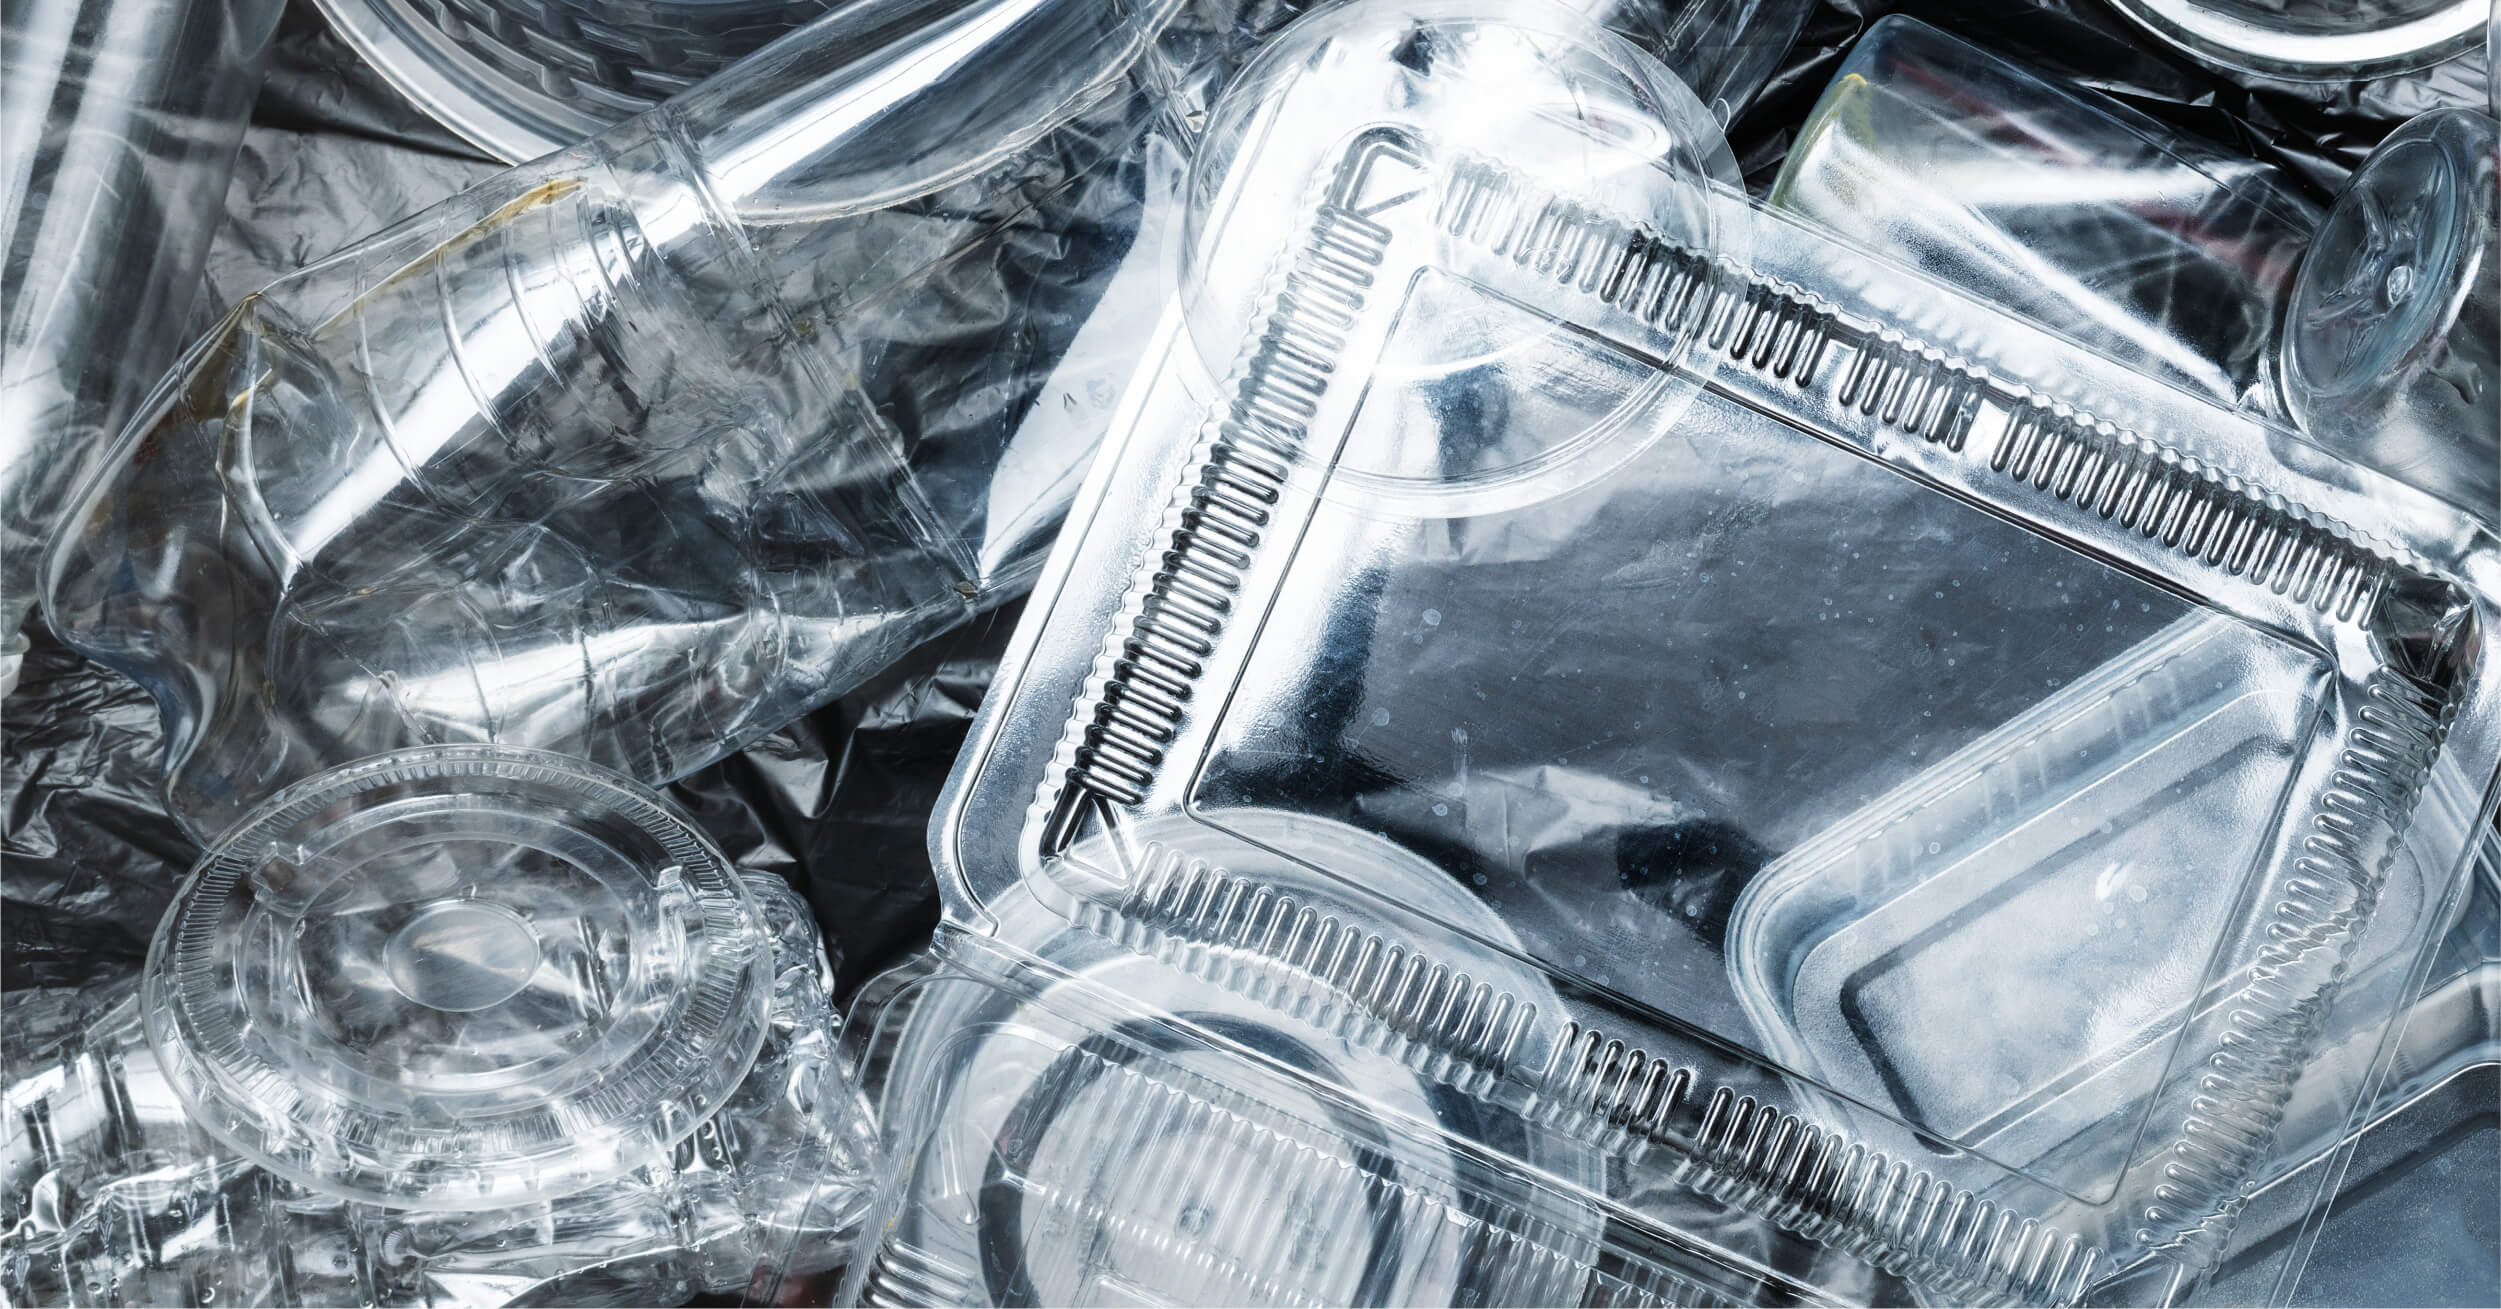 UK's Plastic Packaging Tax: Circular Economy & Less Waste